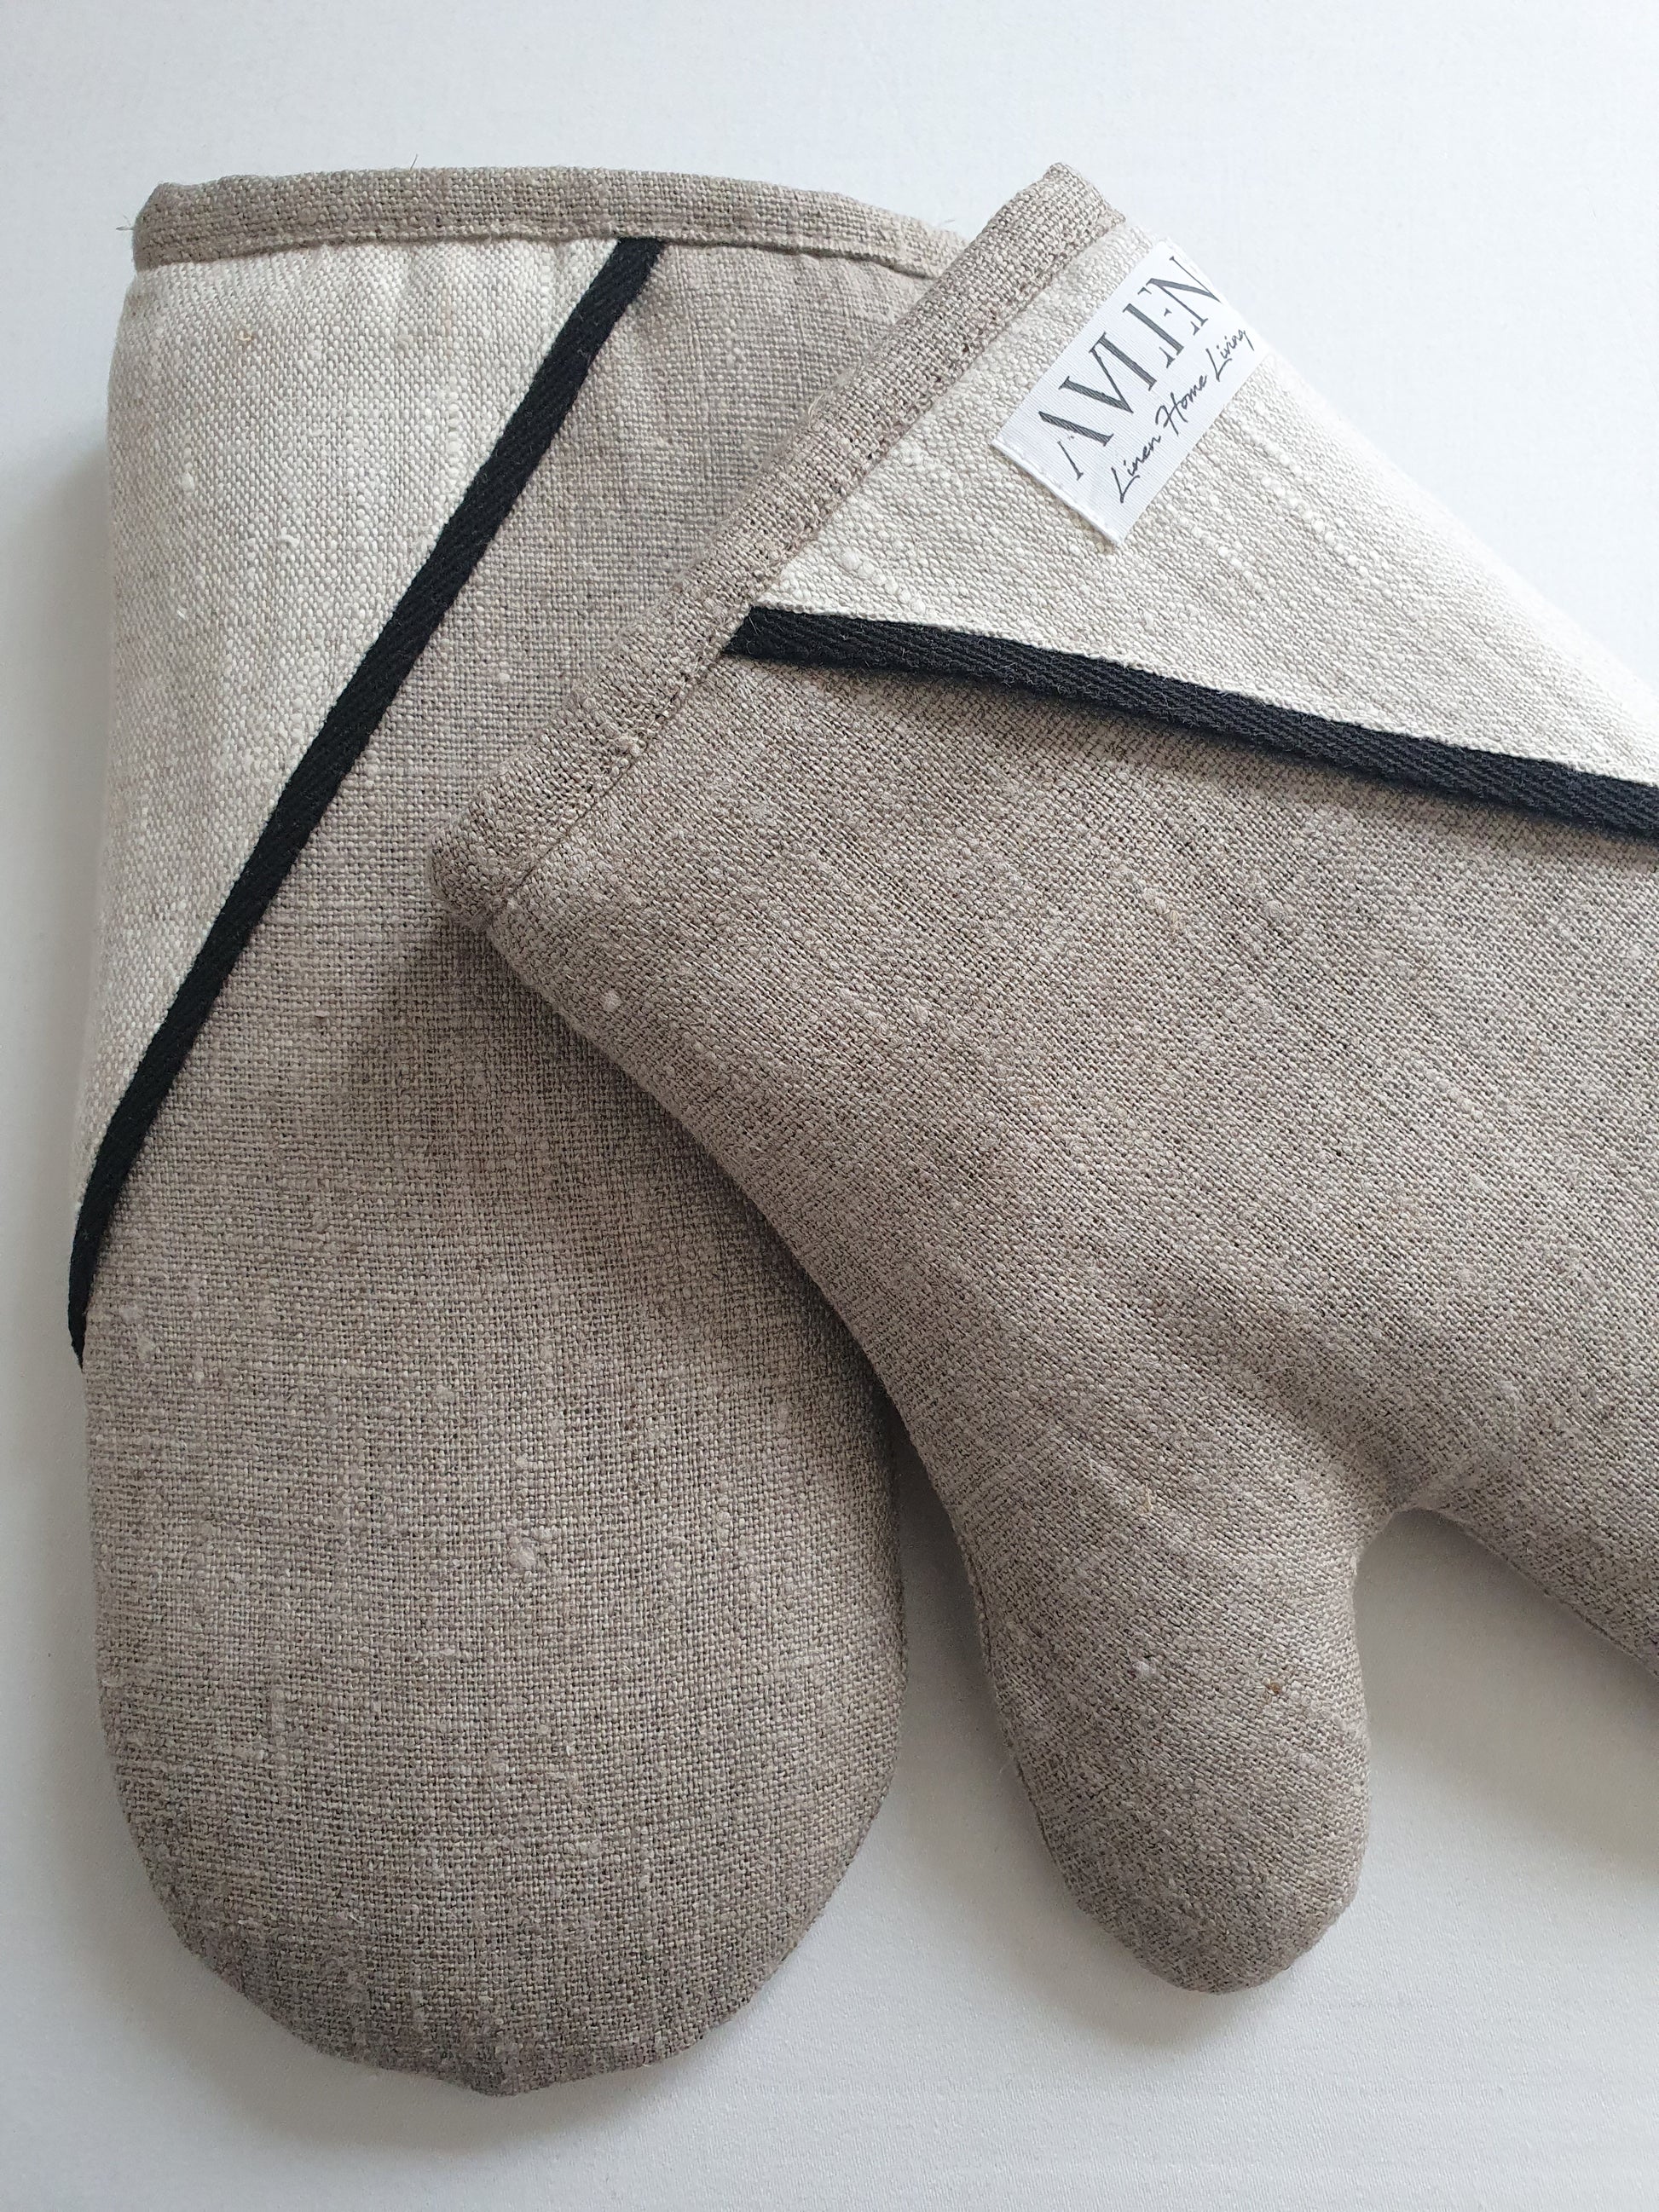 Pure Natural Flax Linen oven gloves in rustic slubby texture in sand beige colour with black accent details